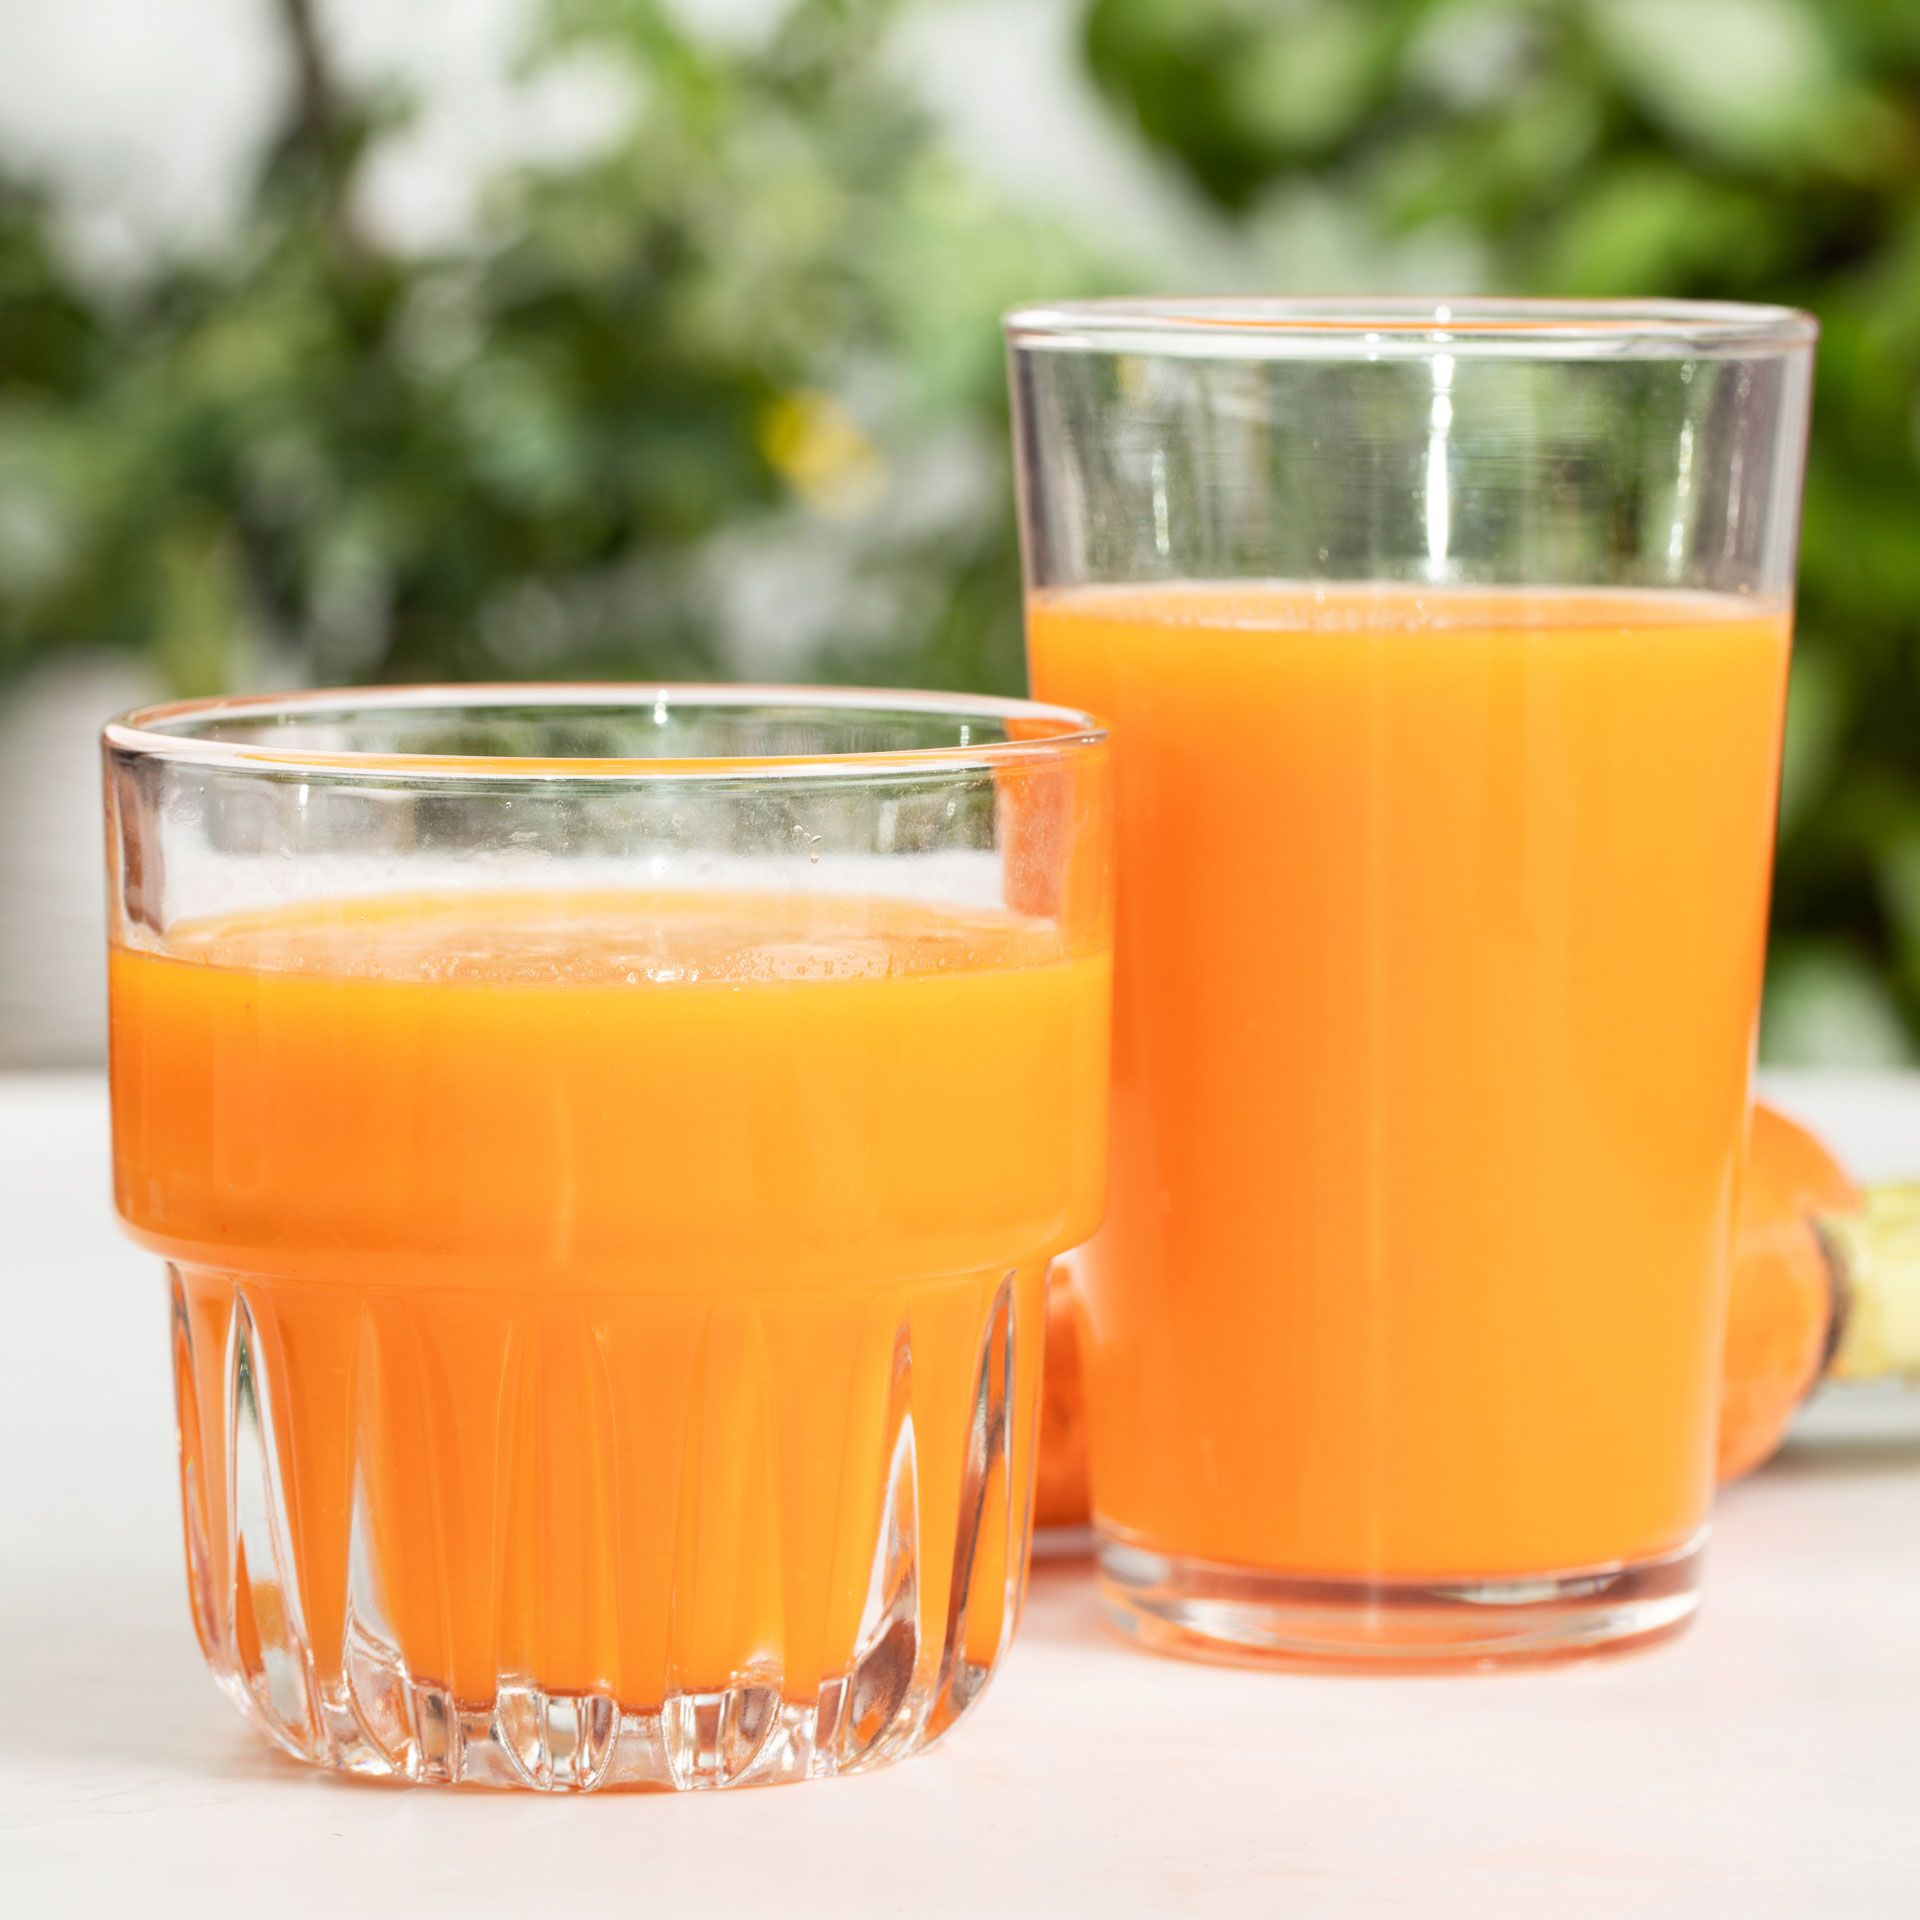 How Can I Make Carrot Juice Without A Juicer In Nganjuk City